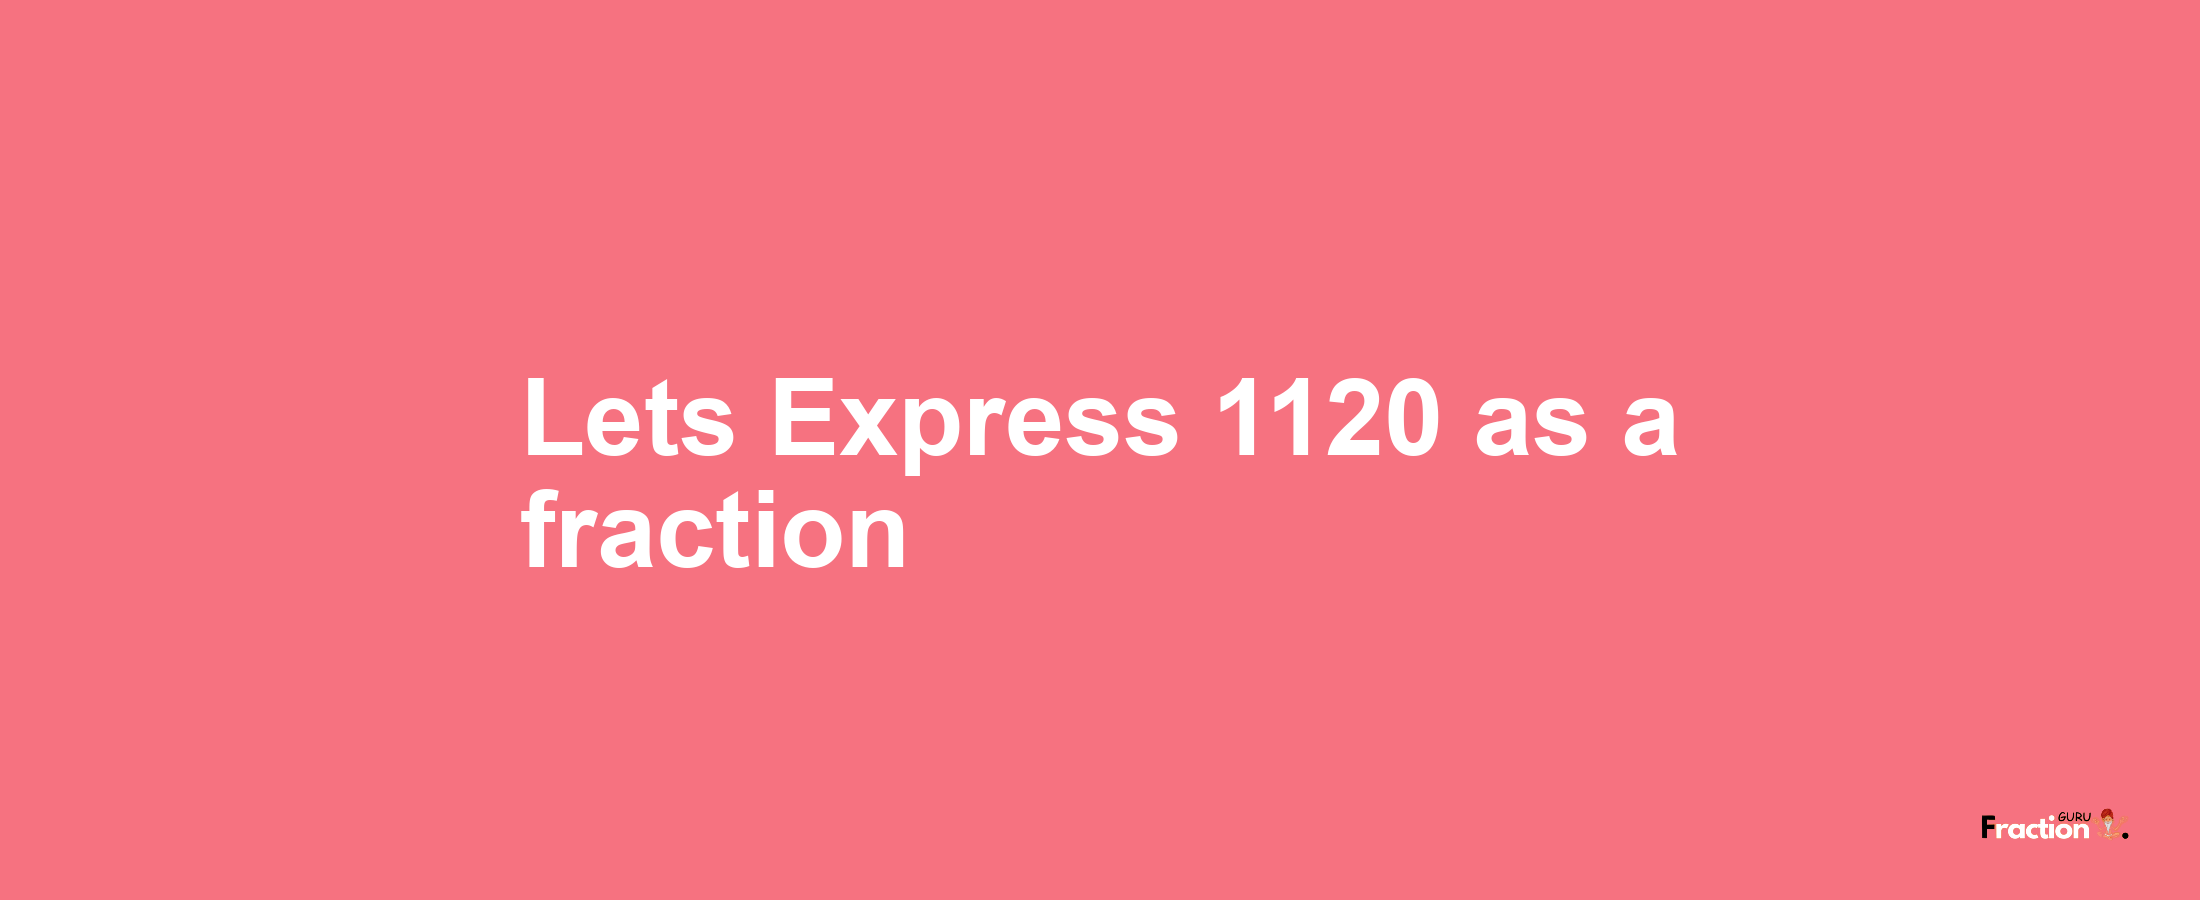 Lets Express 1120 as afraction